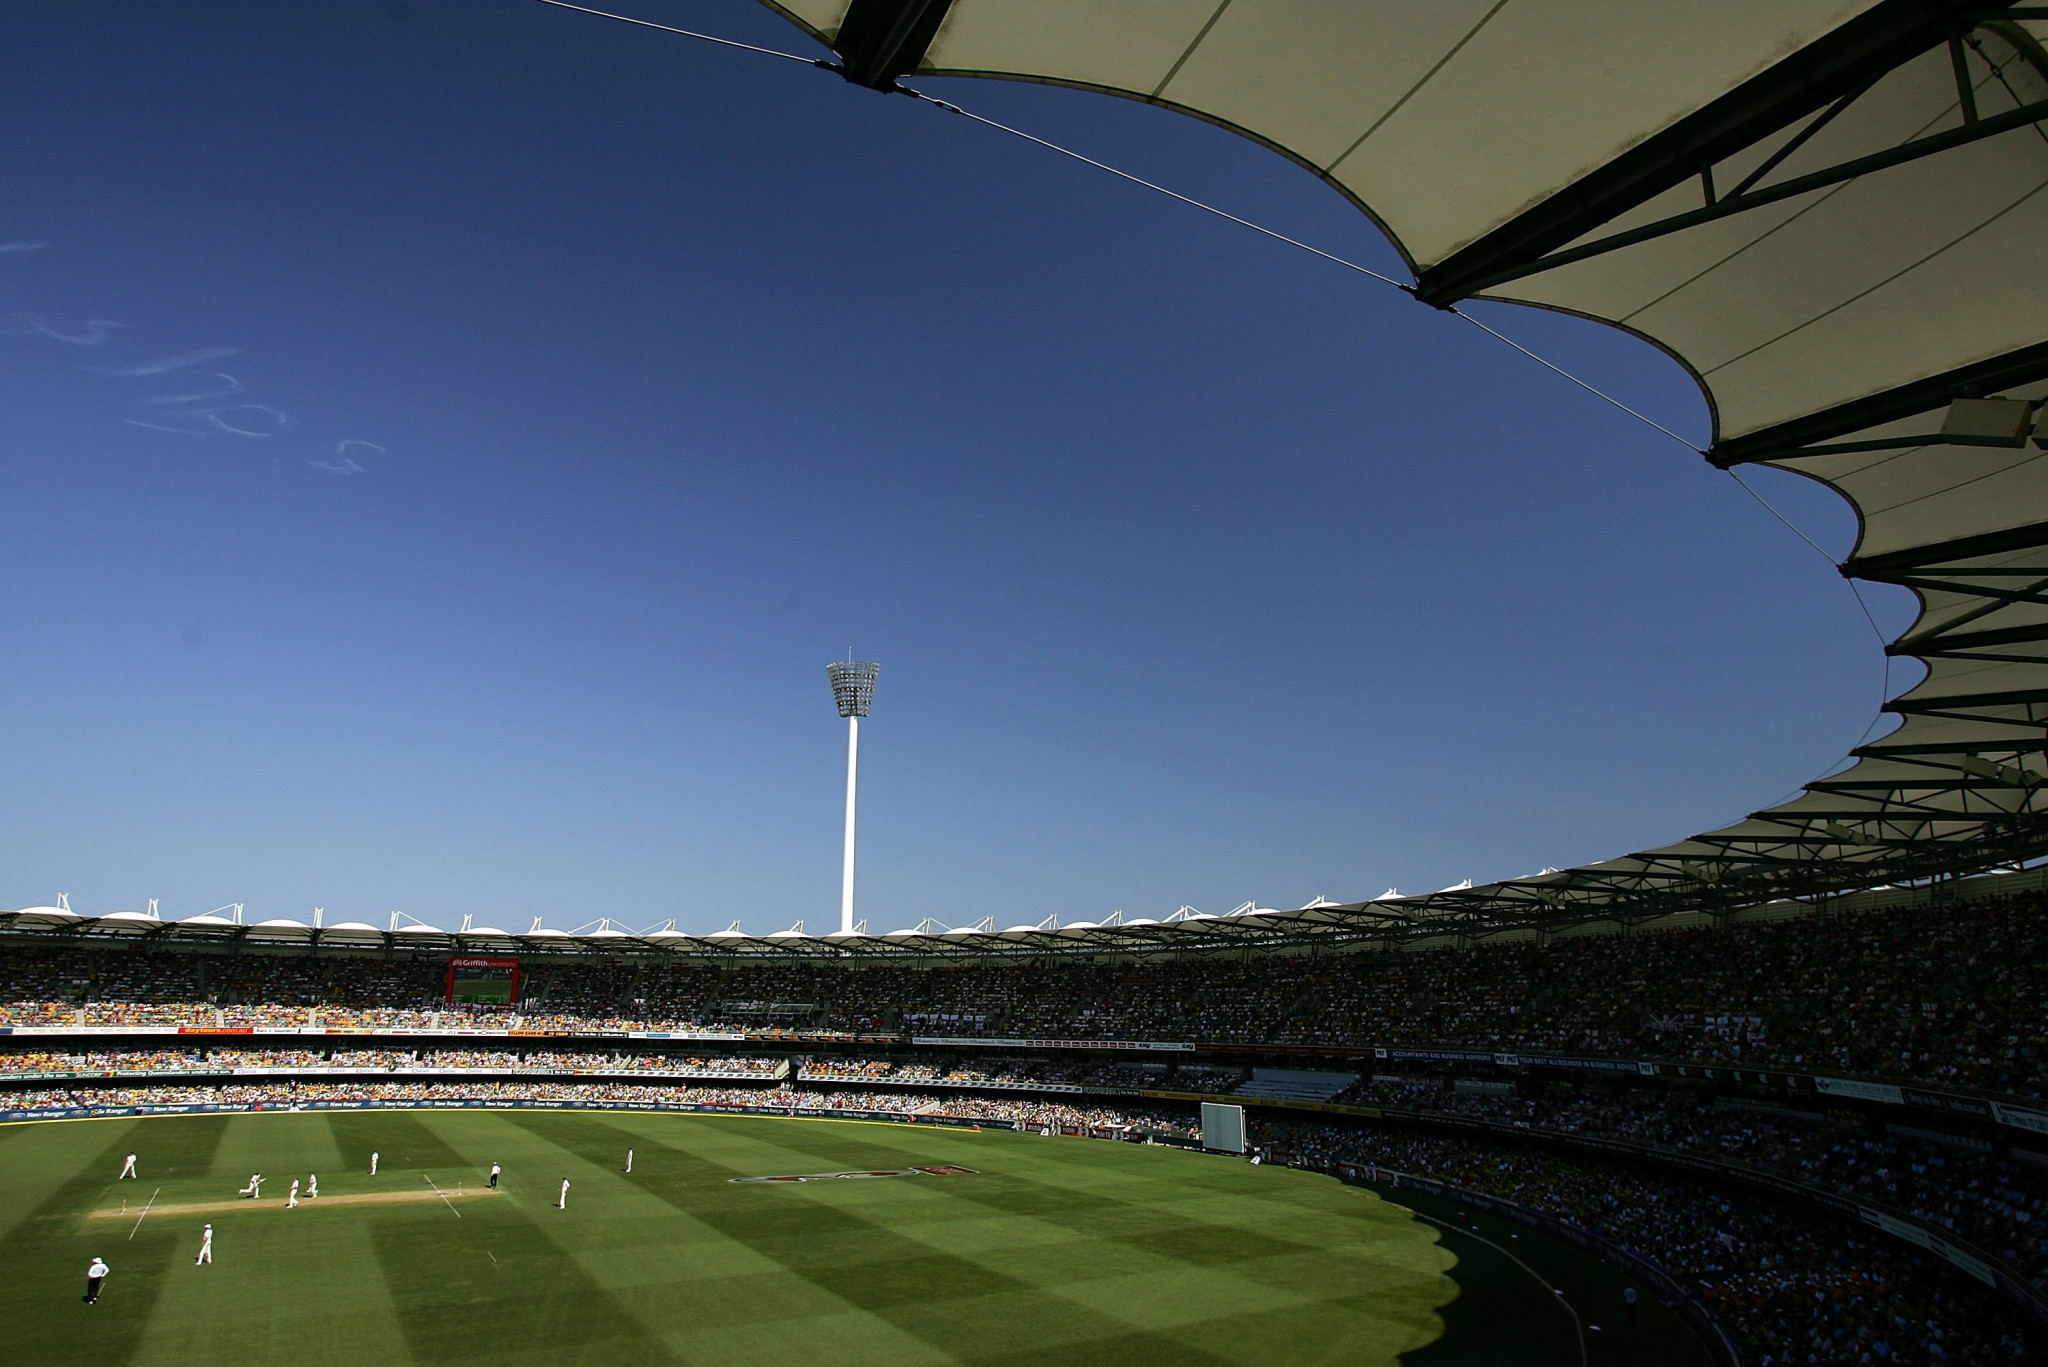 A proposed upgrade to the Gabba has caused division prior to Brisbane's hosting of the Olympic Games ©Getty Images